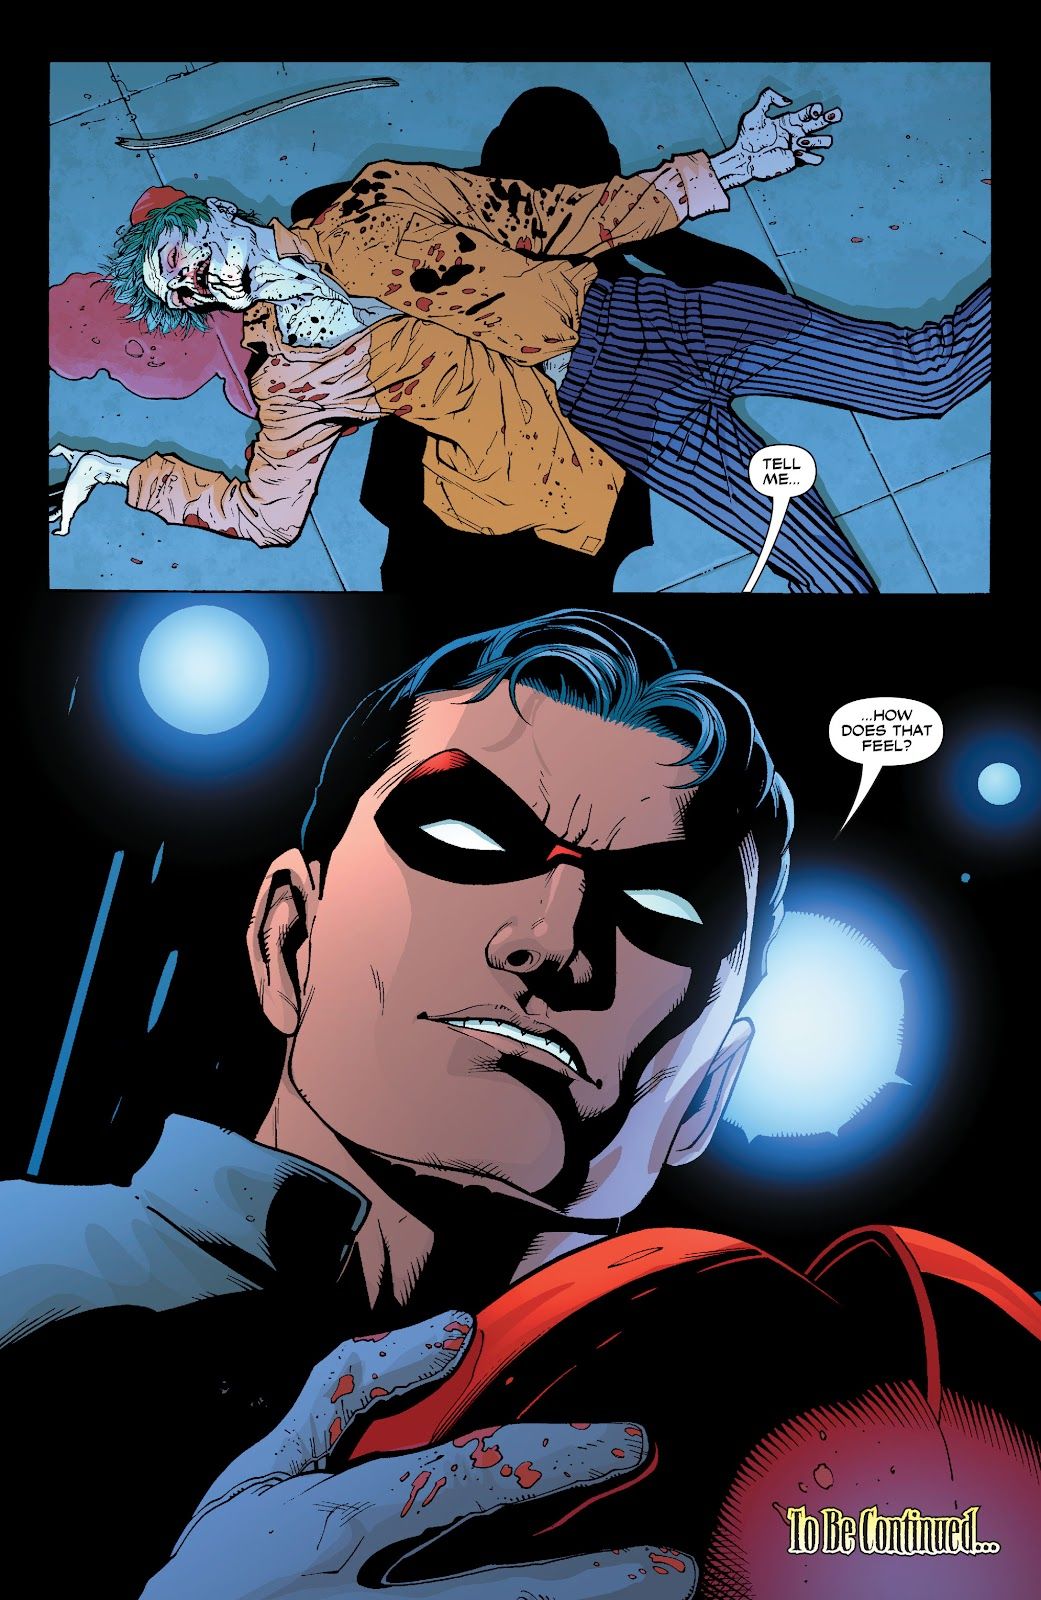 Jason Todd returned for real